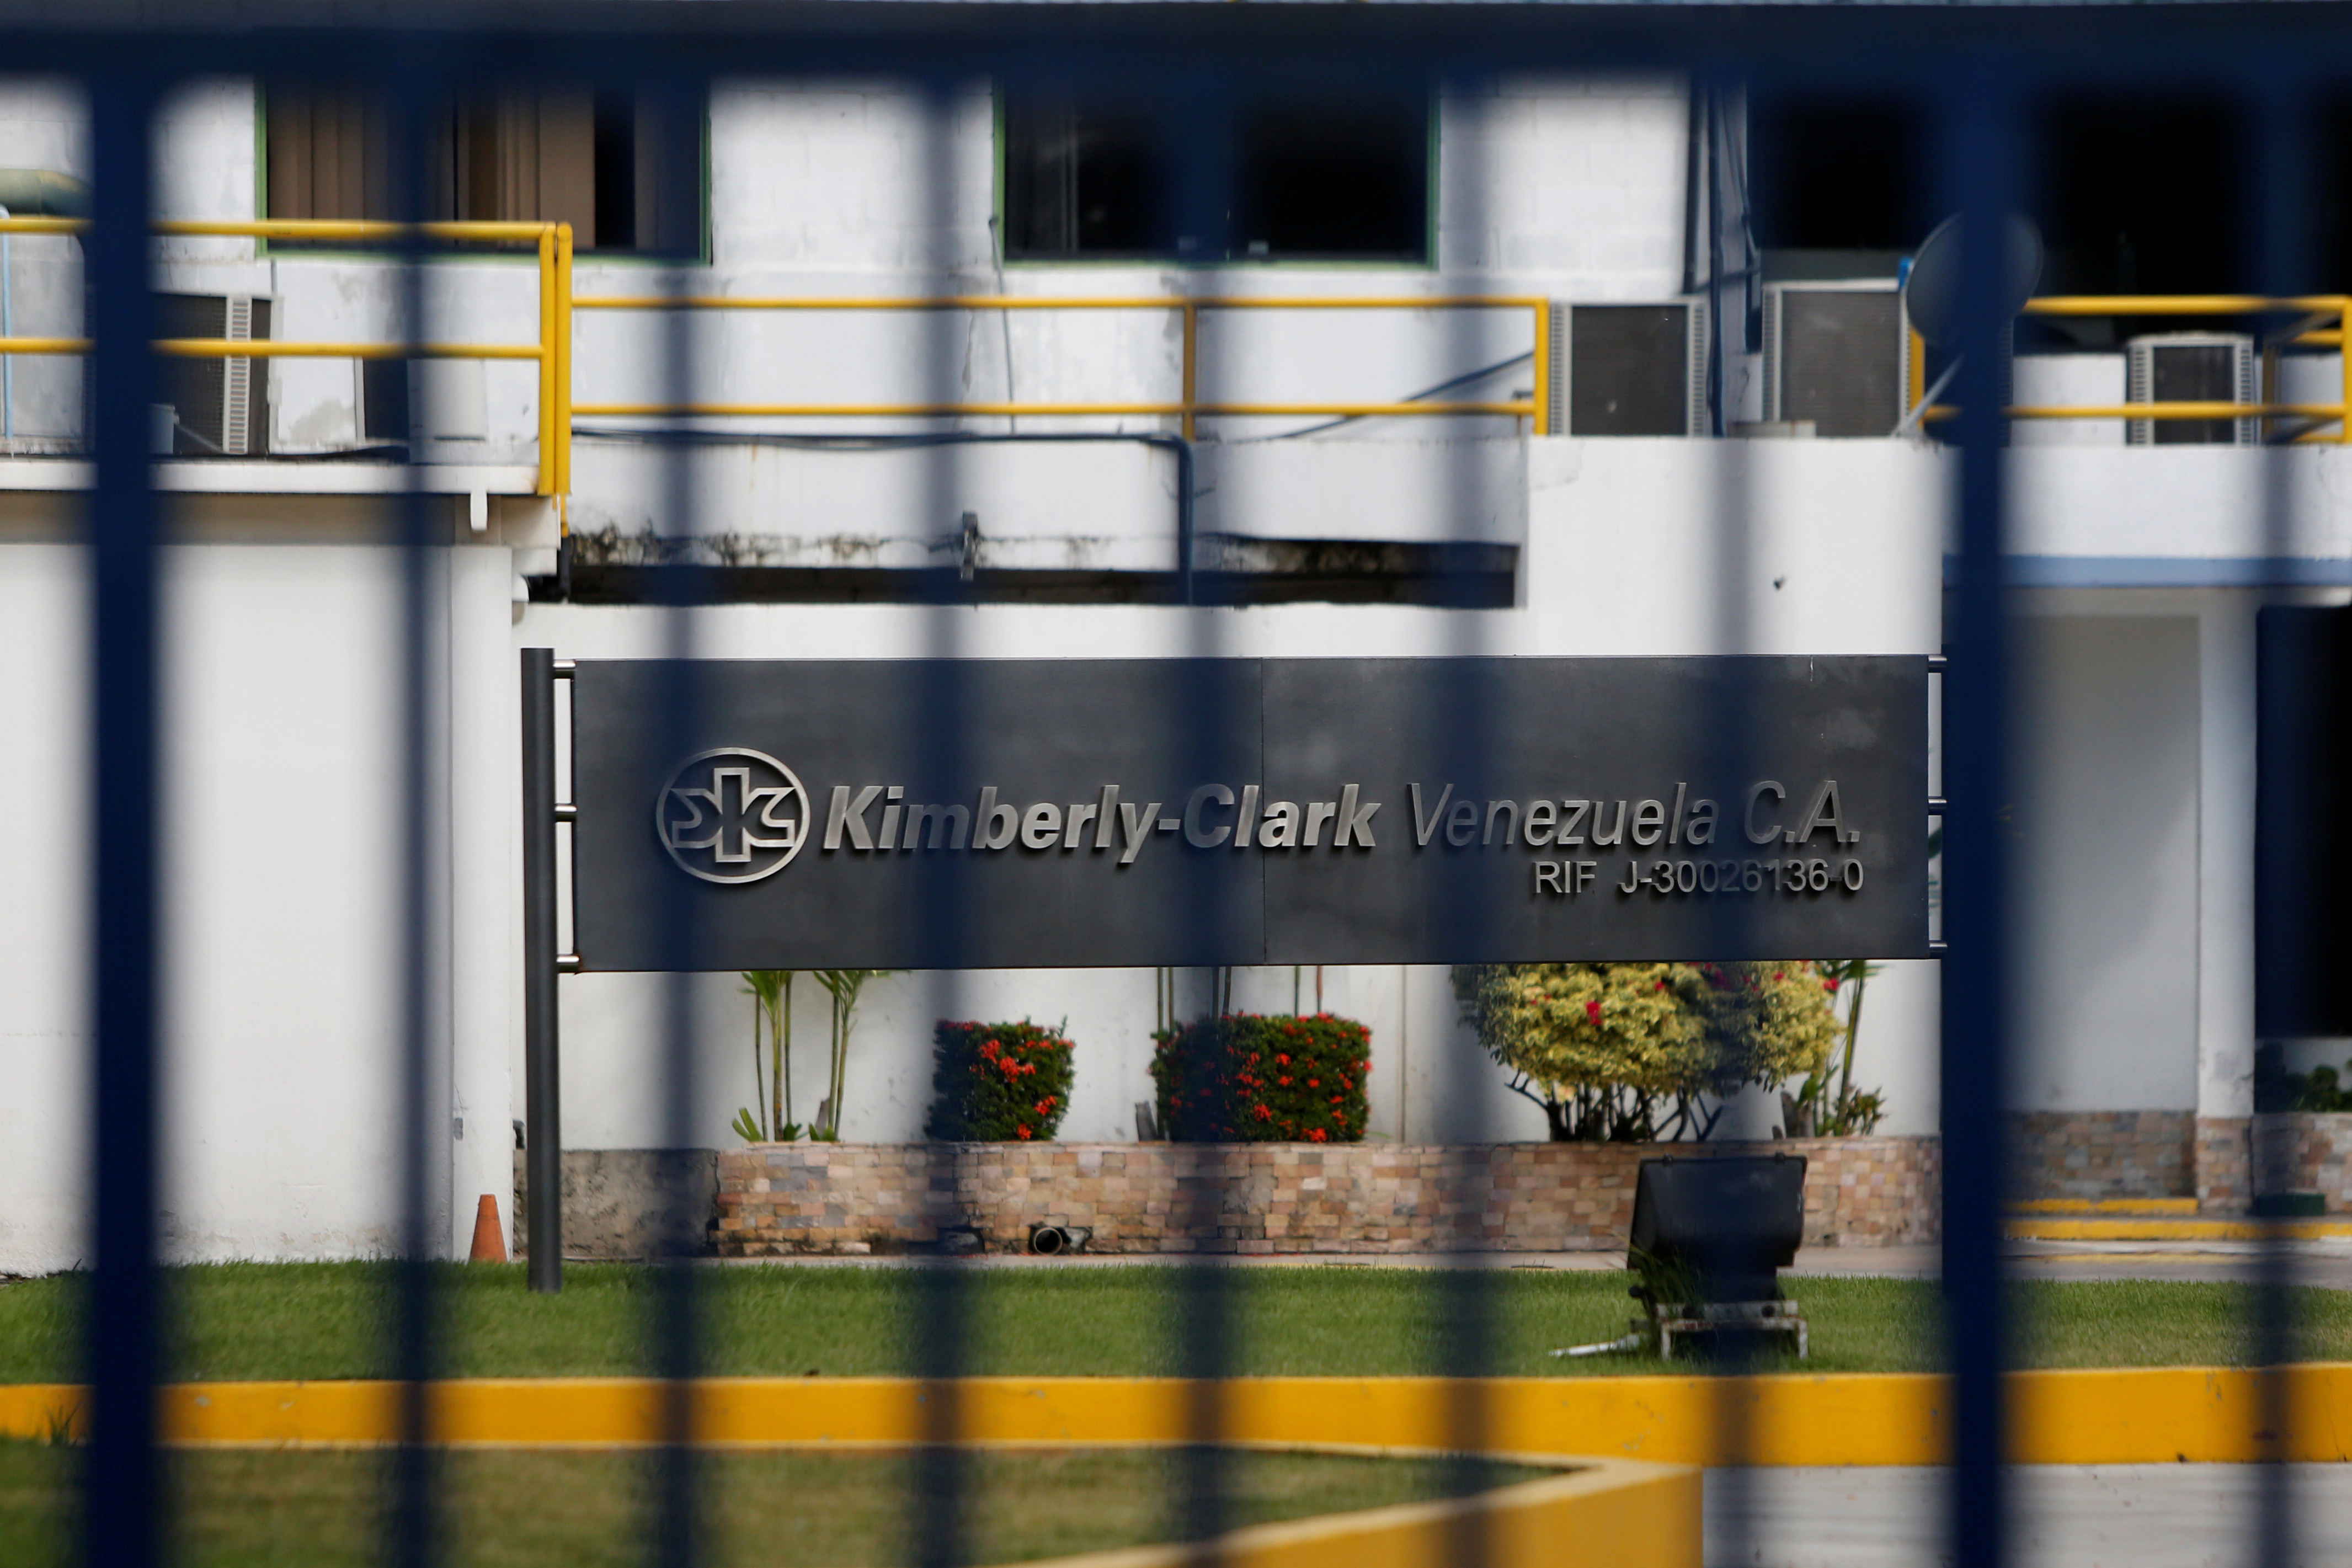 The Kimberly-Clark sign is pictured in Maracay